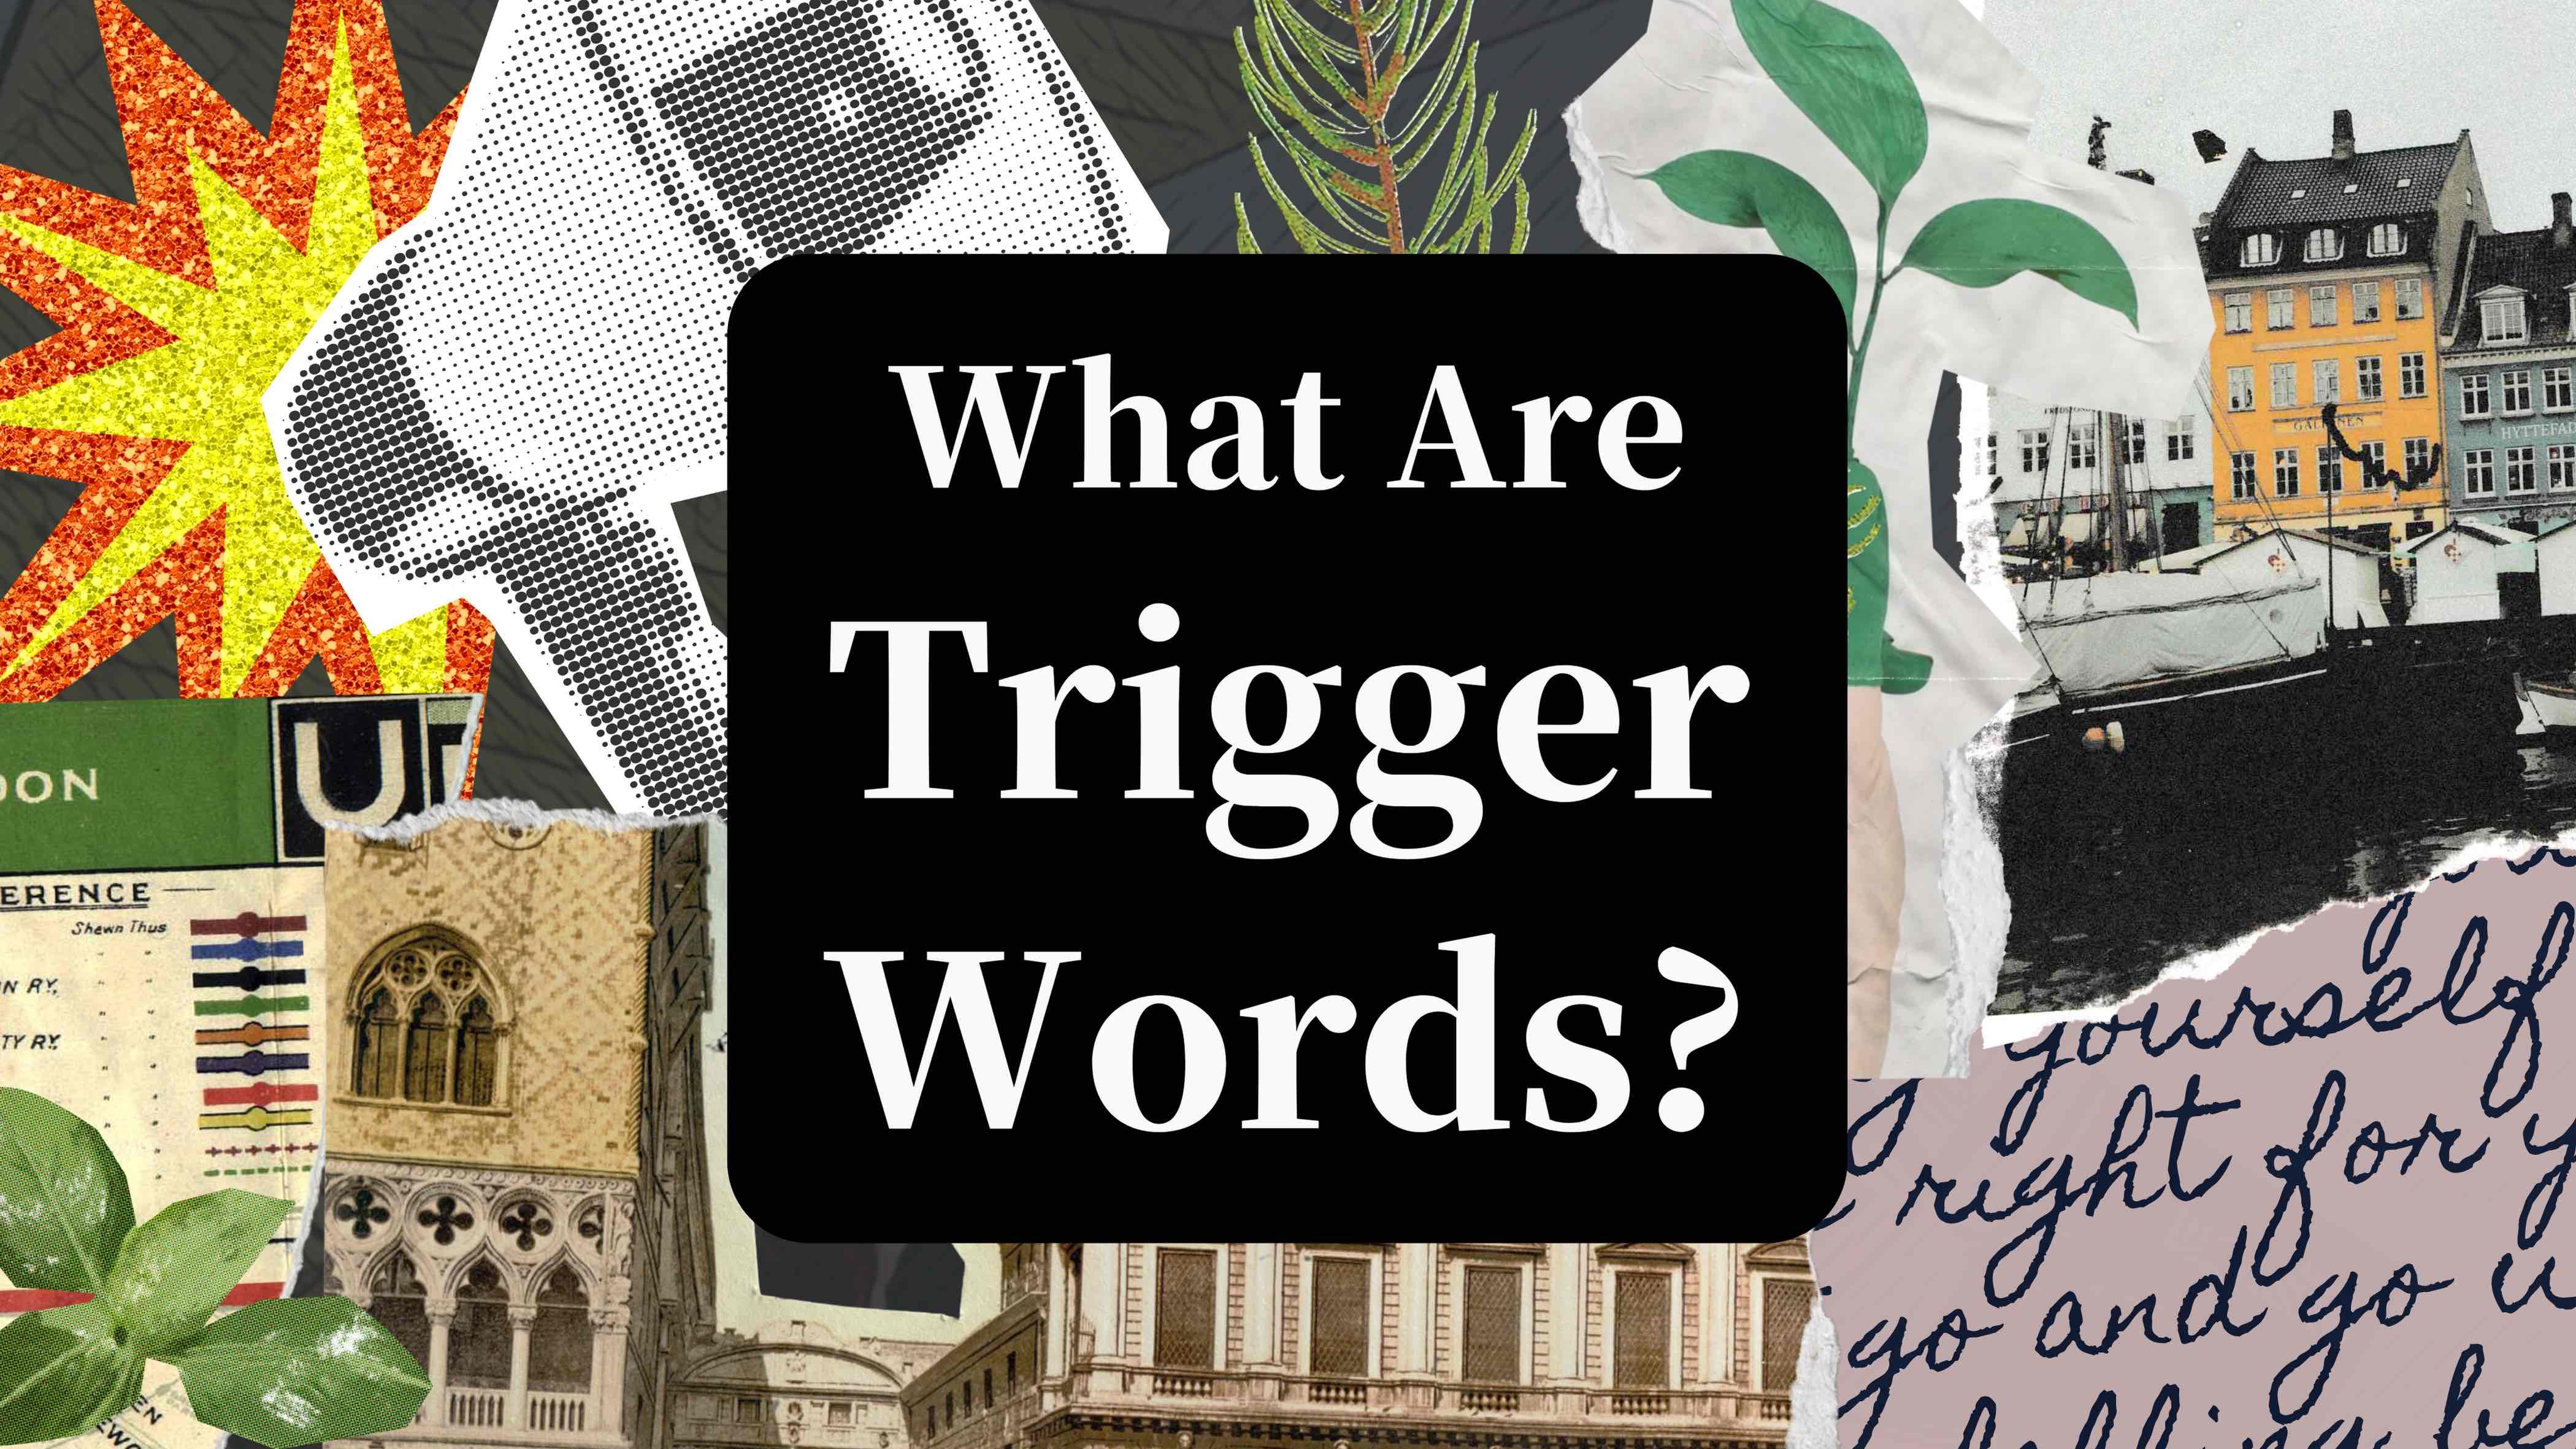 172 Trigger Words That Stop the Scroll